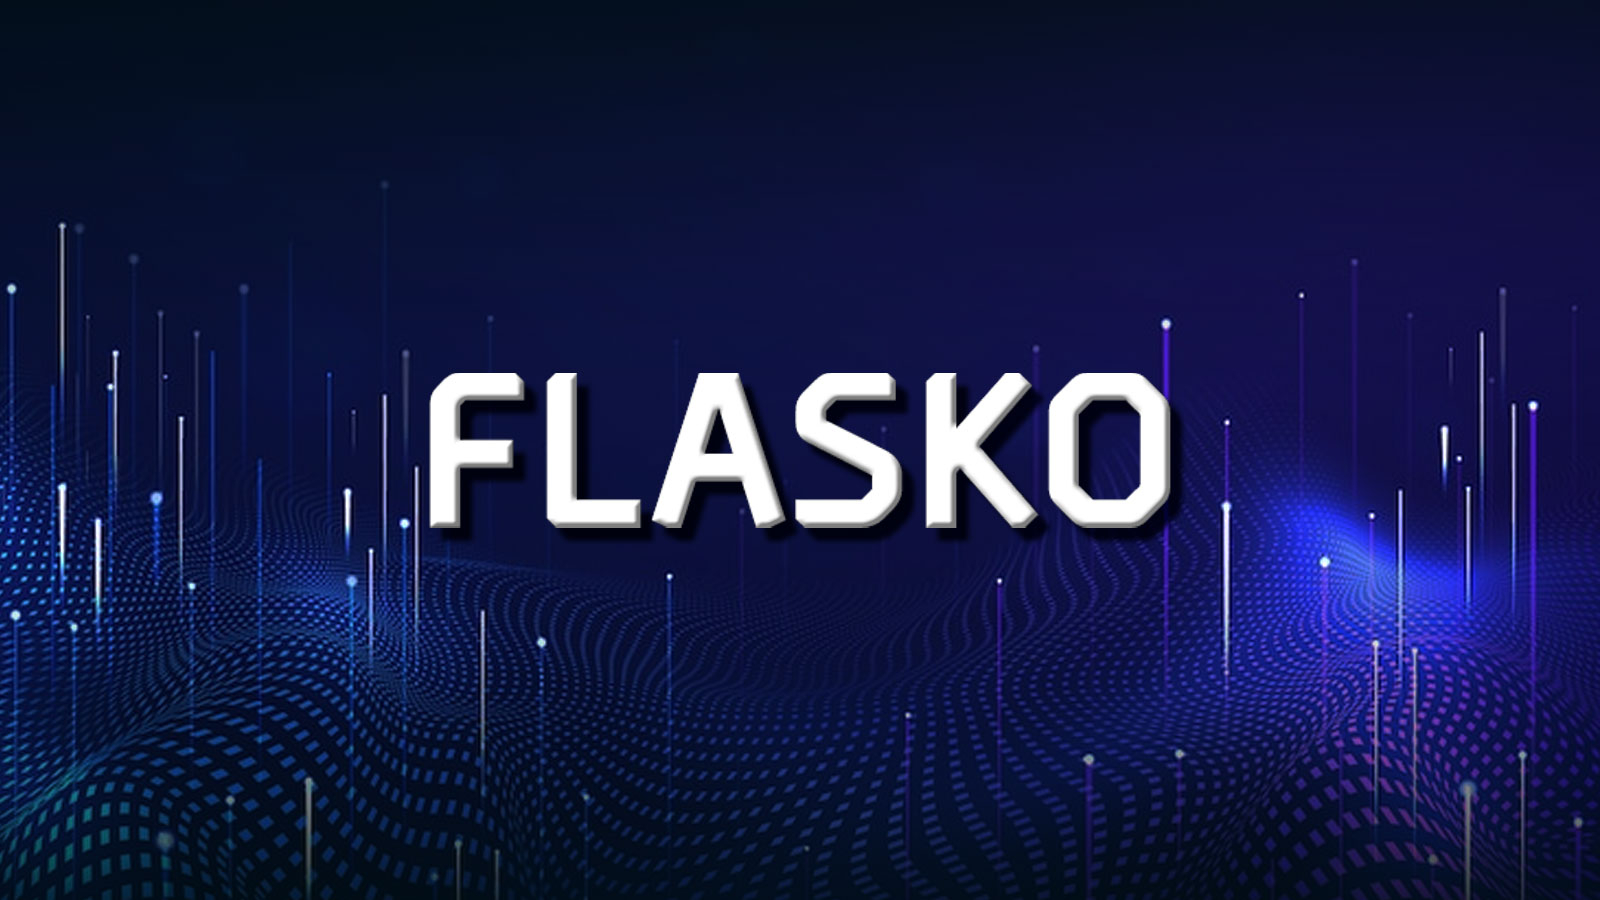 Flasko (FLSK) Gains Traction, Solana (SOL) and Shiba Inu (SHIB) Aiming at Recovery In 2022